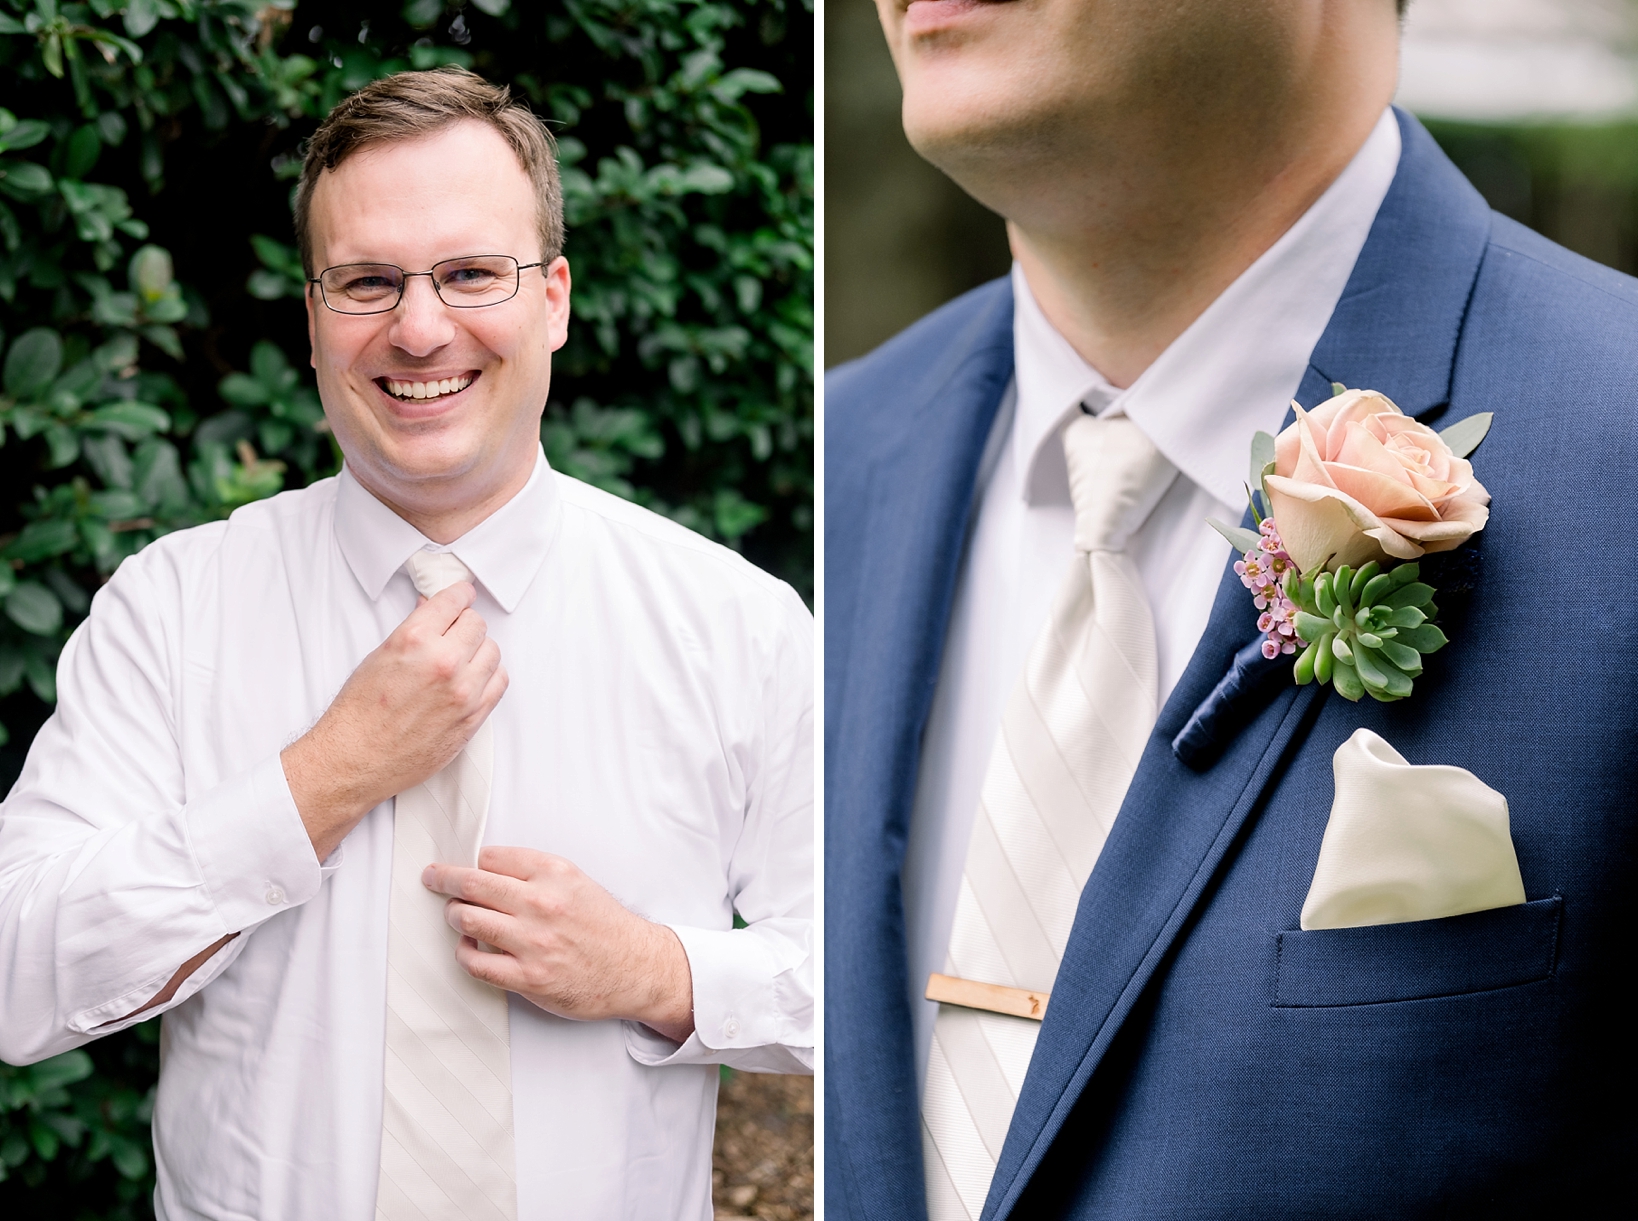 A Groom gets ready for his cross creek wedding by adjusting his necktie